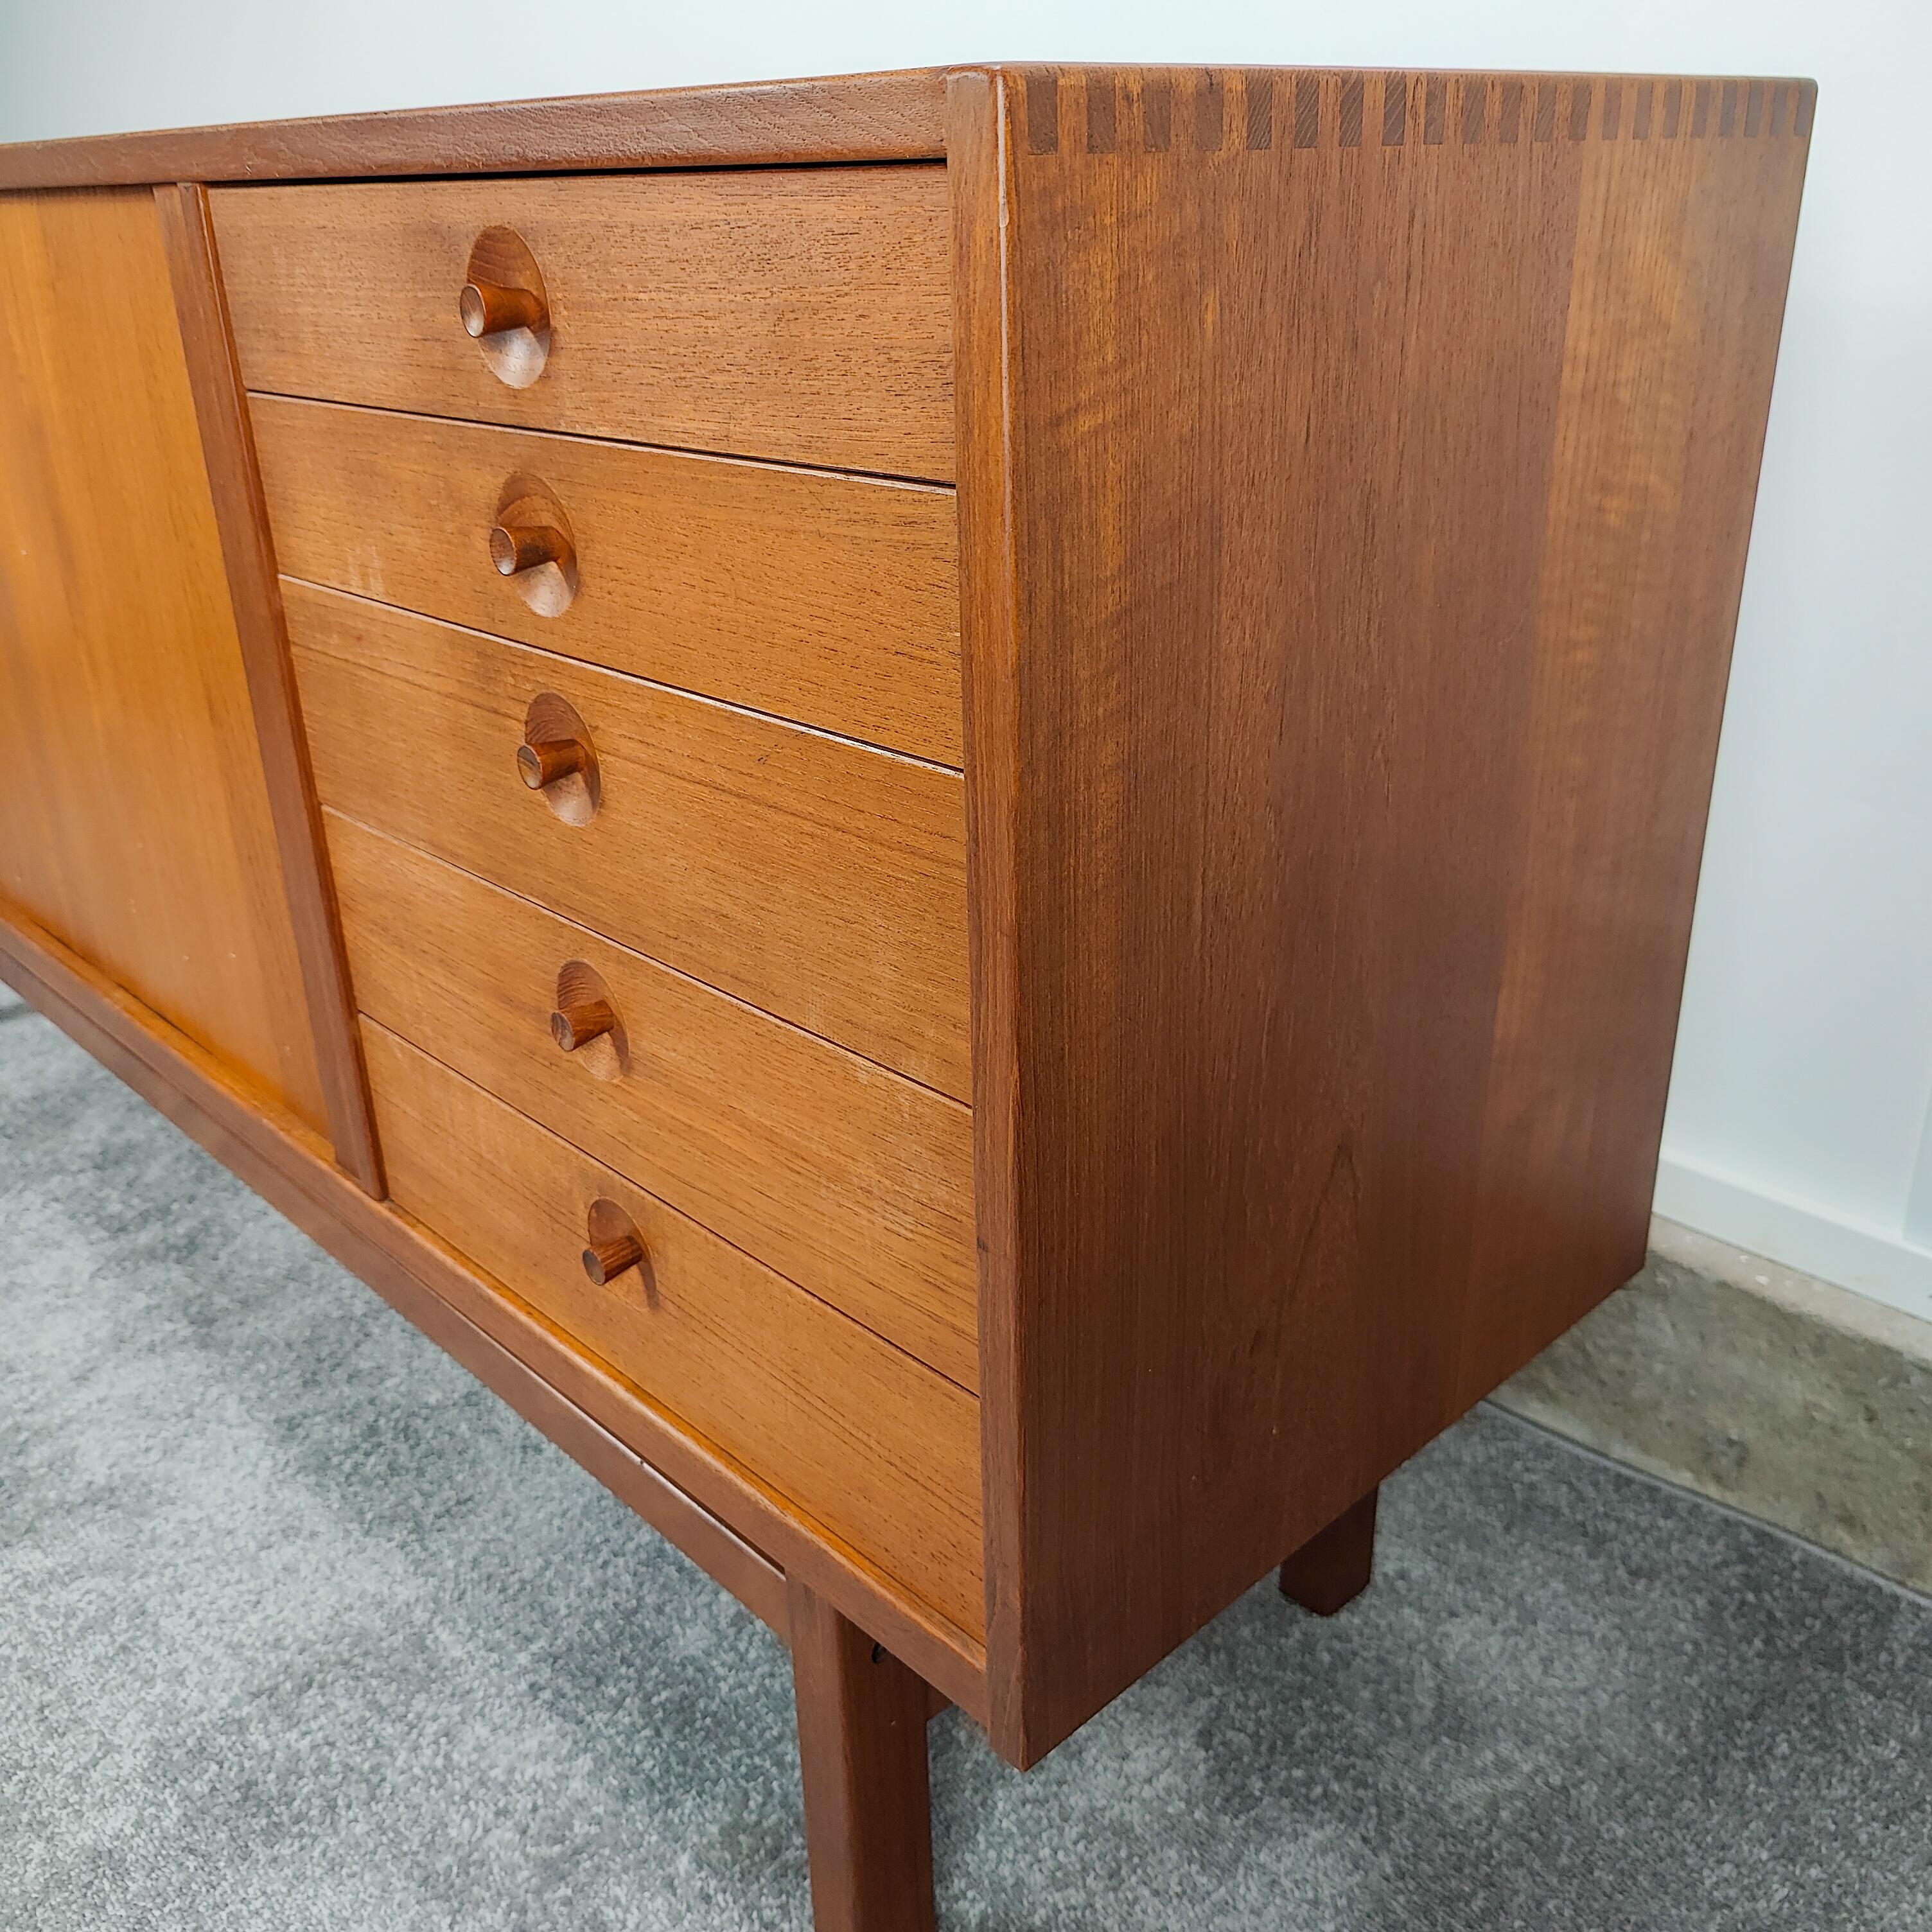 Nils Jonsson for Troeds solid teak sideboard with tambour doors. Features striking joinery and impressive drawer pulls in great original condition.
Measures approximately 68W x 16.5D x 31T.

 